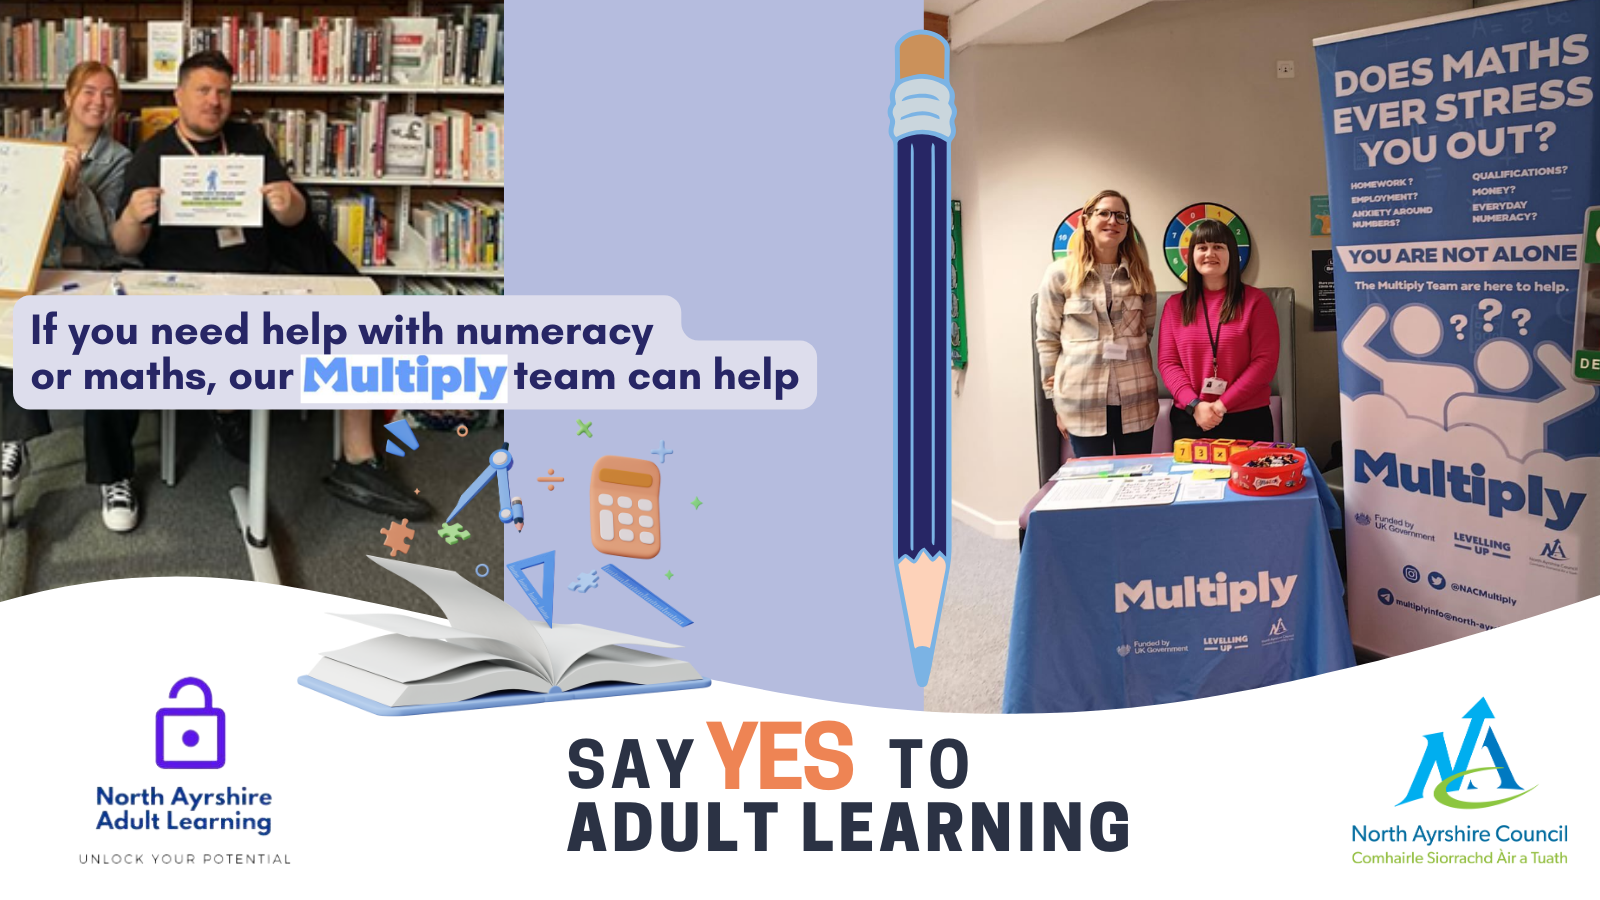 Multiply say yes to Adult Learning